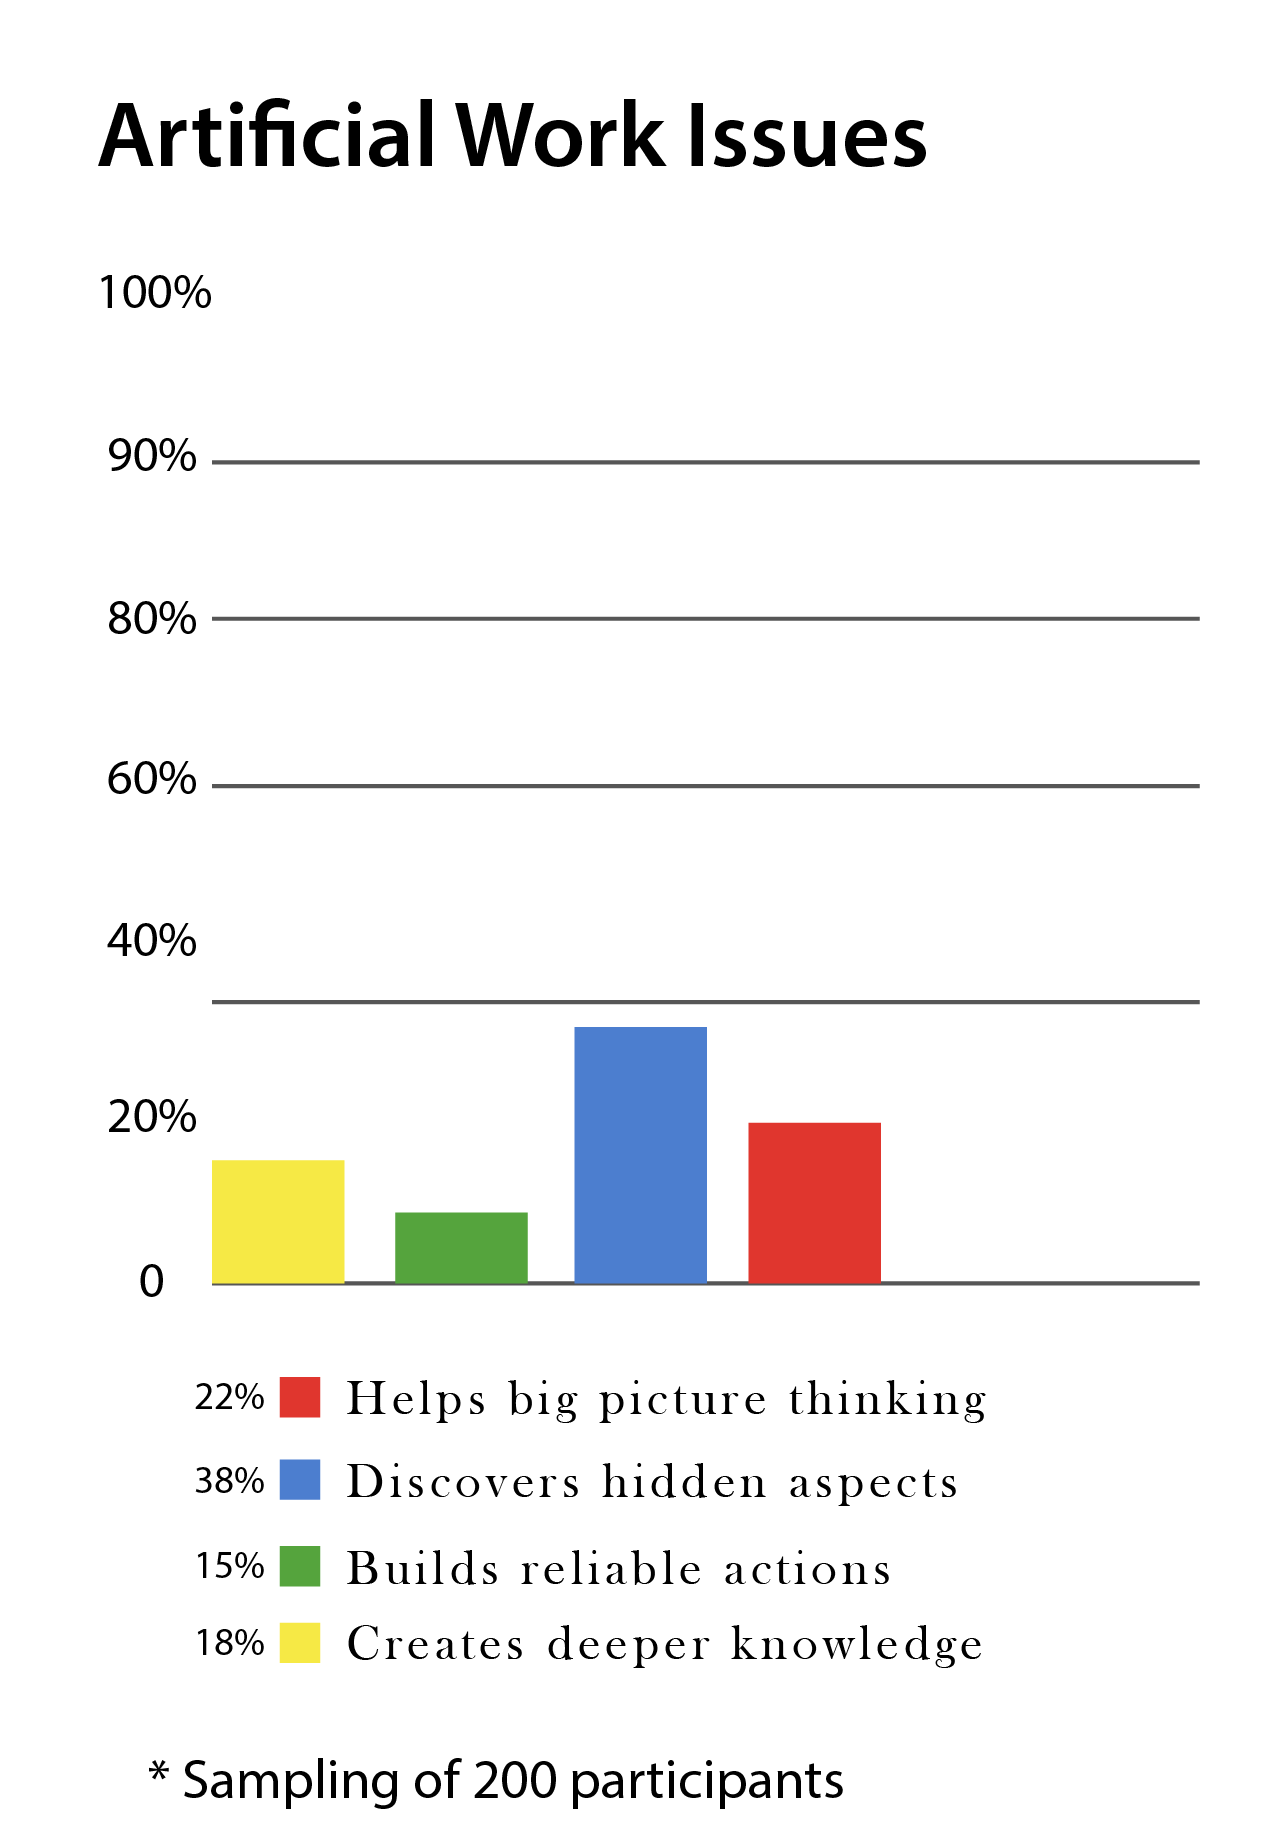  Shows how participants responded to an exercise where work issues were made up by an instructional designer; between 15 percent and 38 percent found them helpful